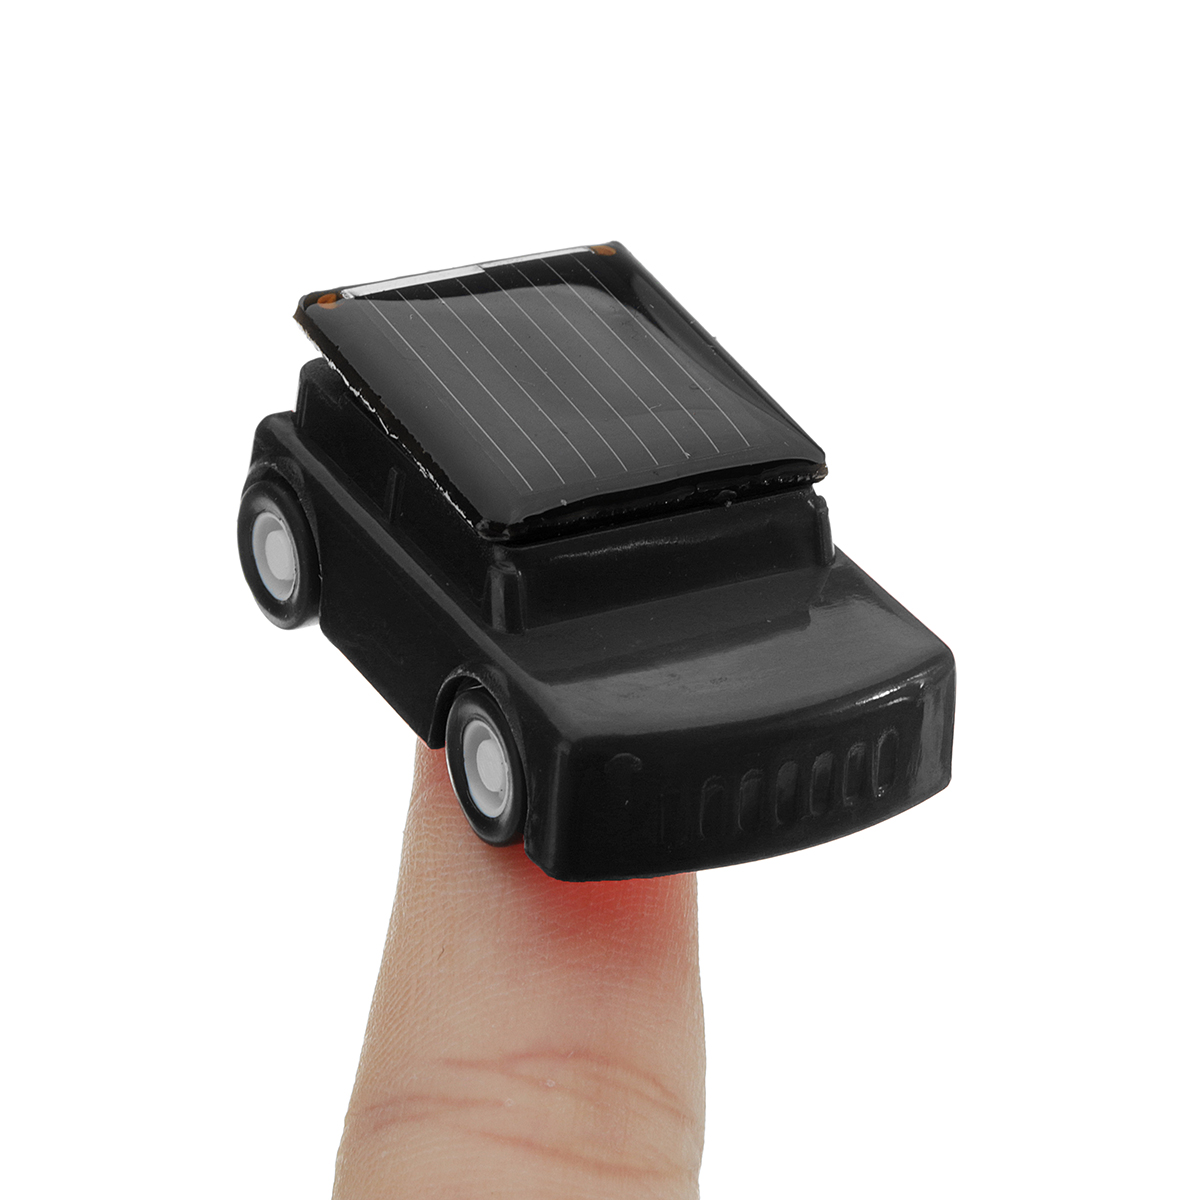 Solar-Powered-Toy-Mini-Car-Kids-Gift-Super-Cute-Creative-ABS-No-toxic-Material-Children-Favorate-1315990-8